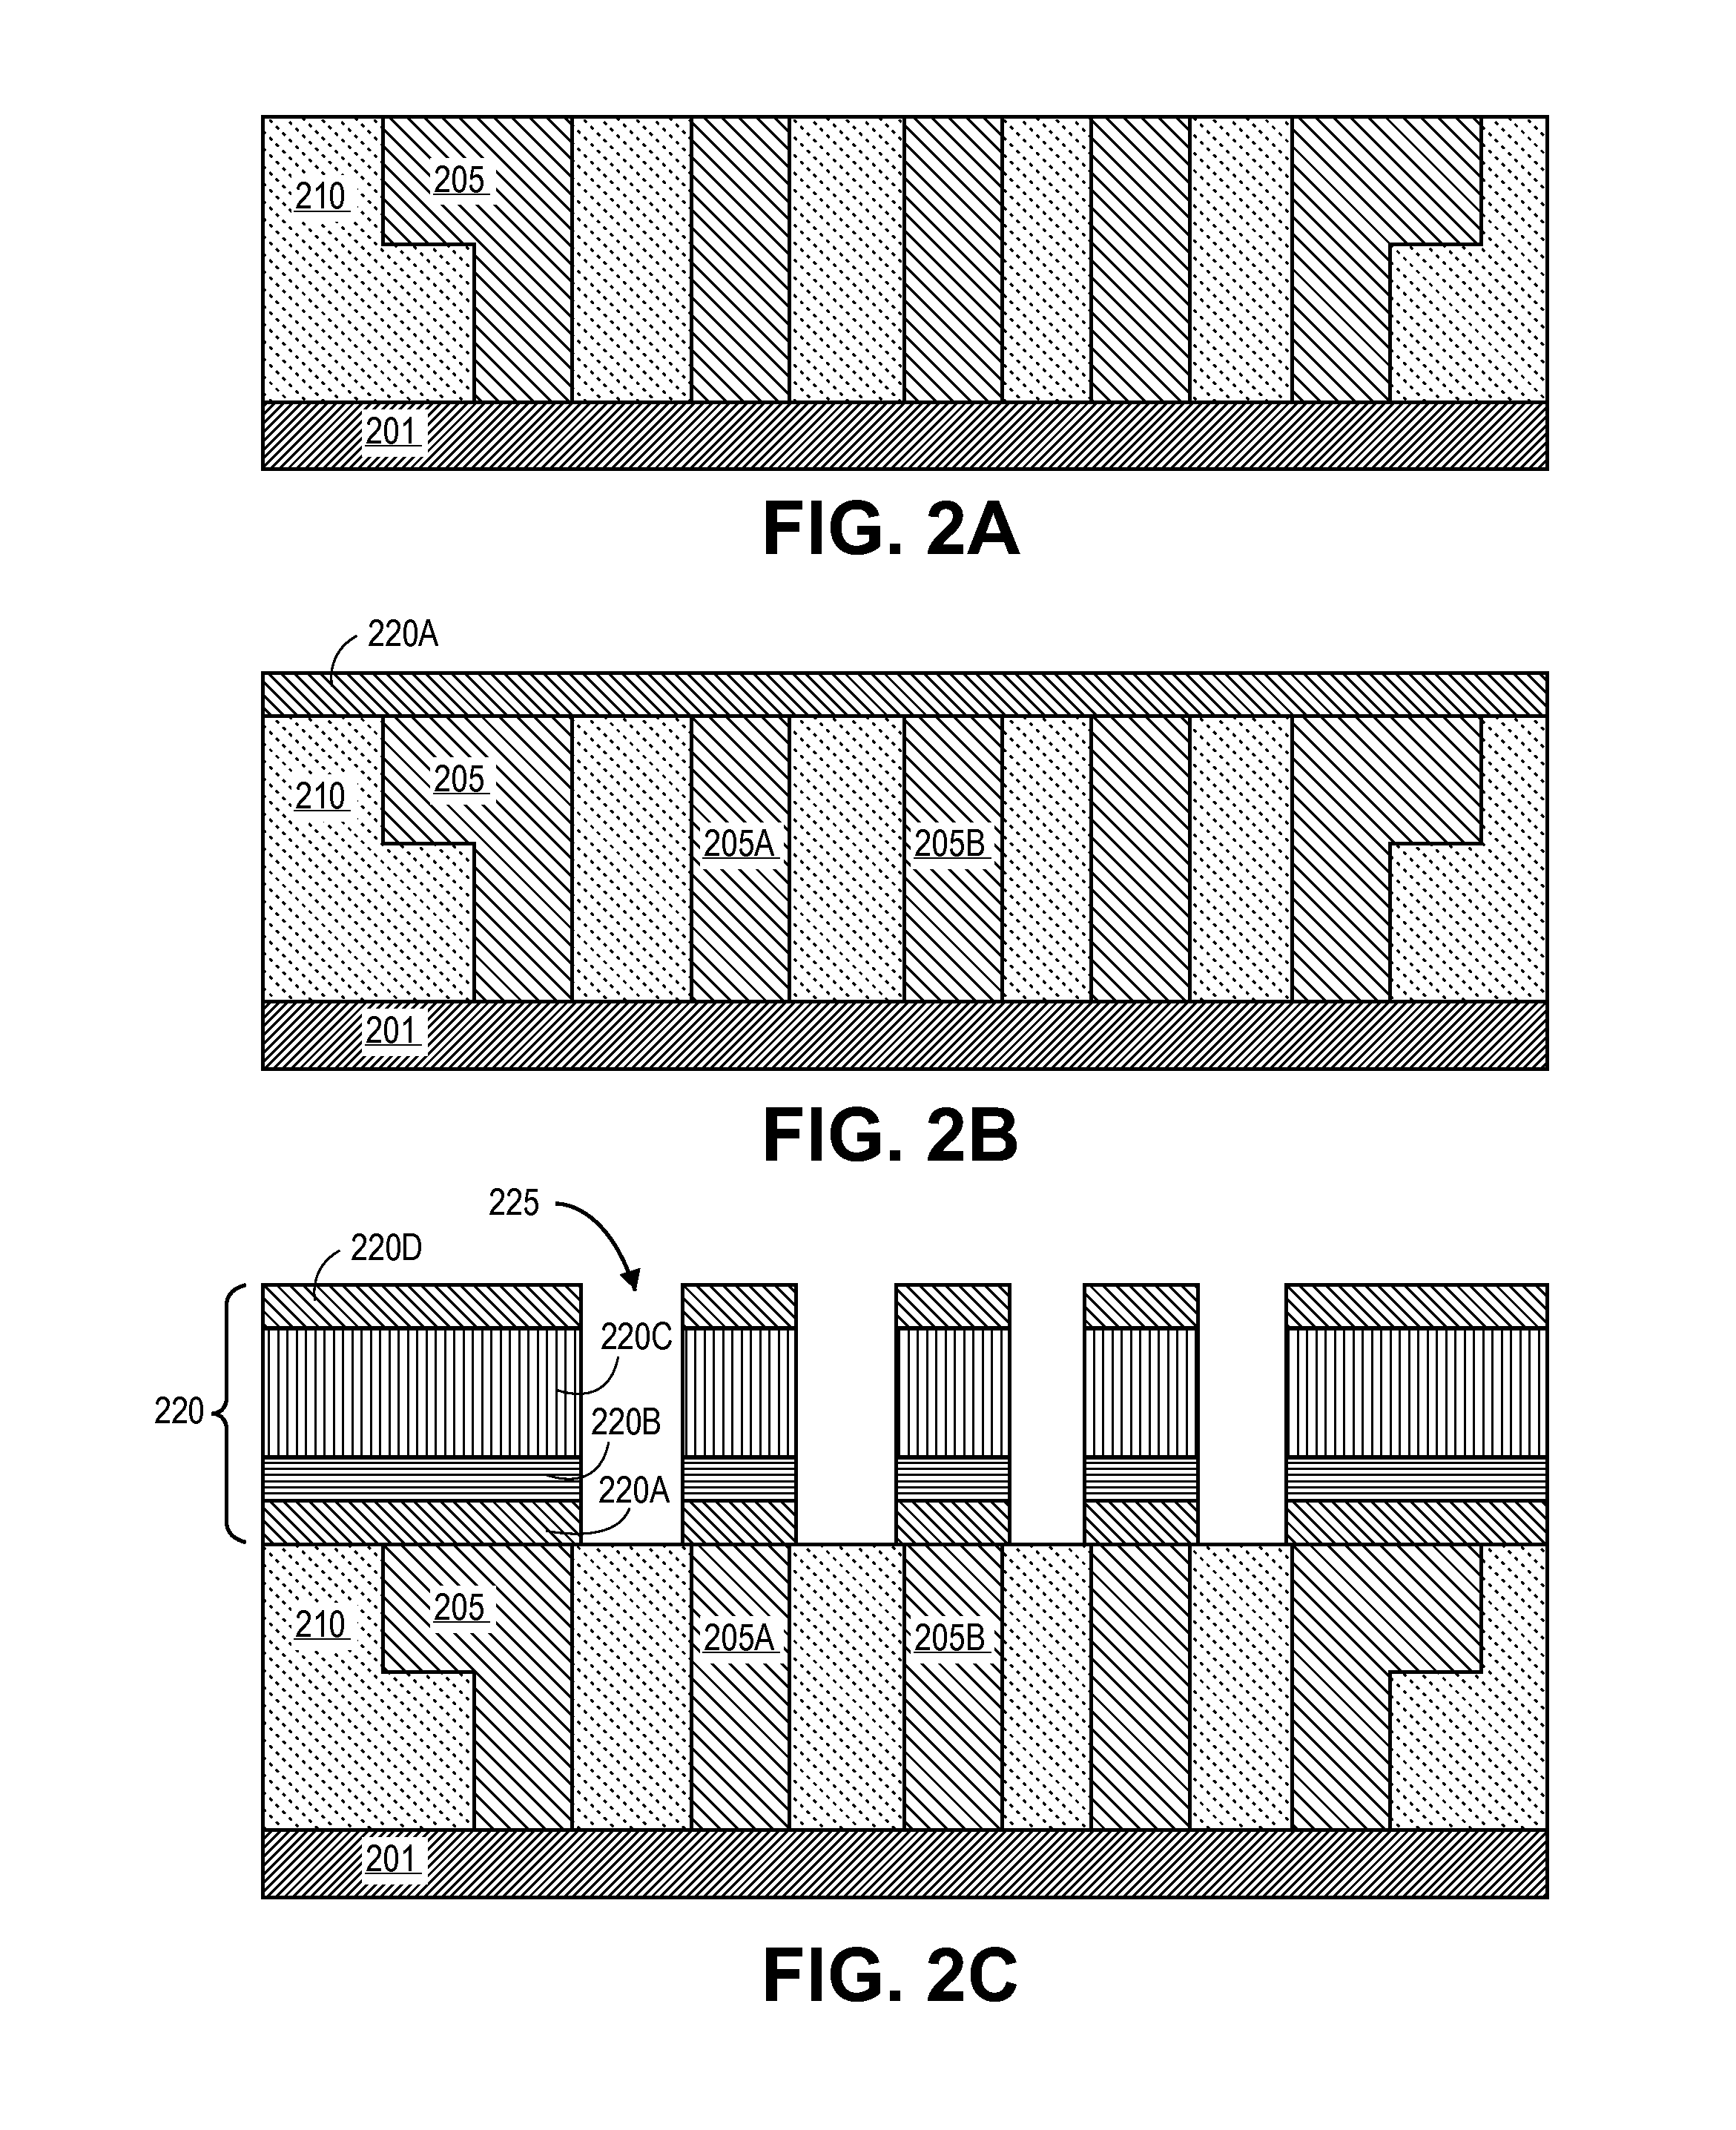 Conformal low temperature hermetic dielectric diffusion barriers